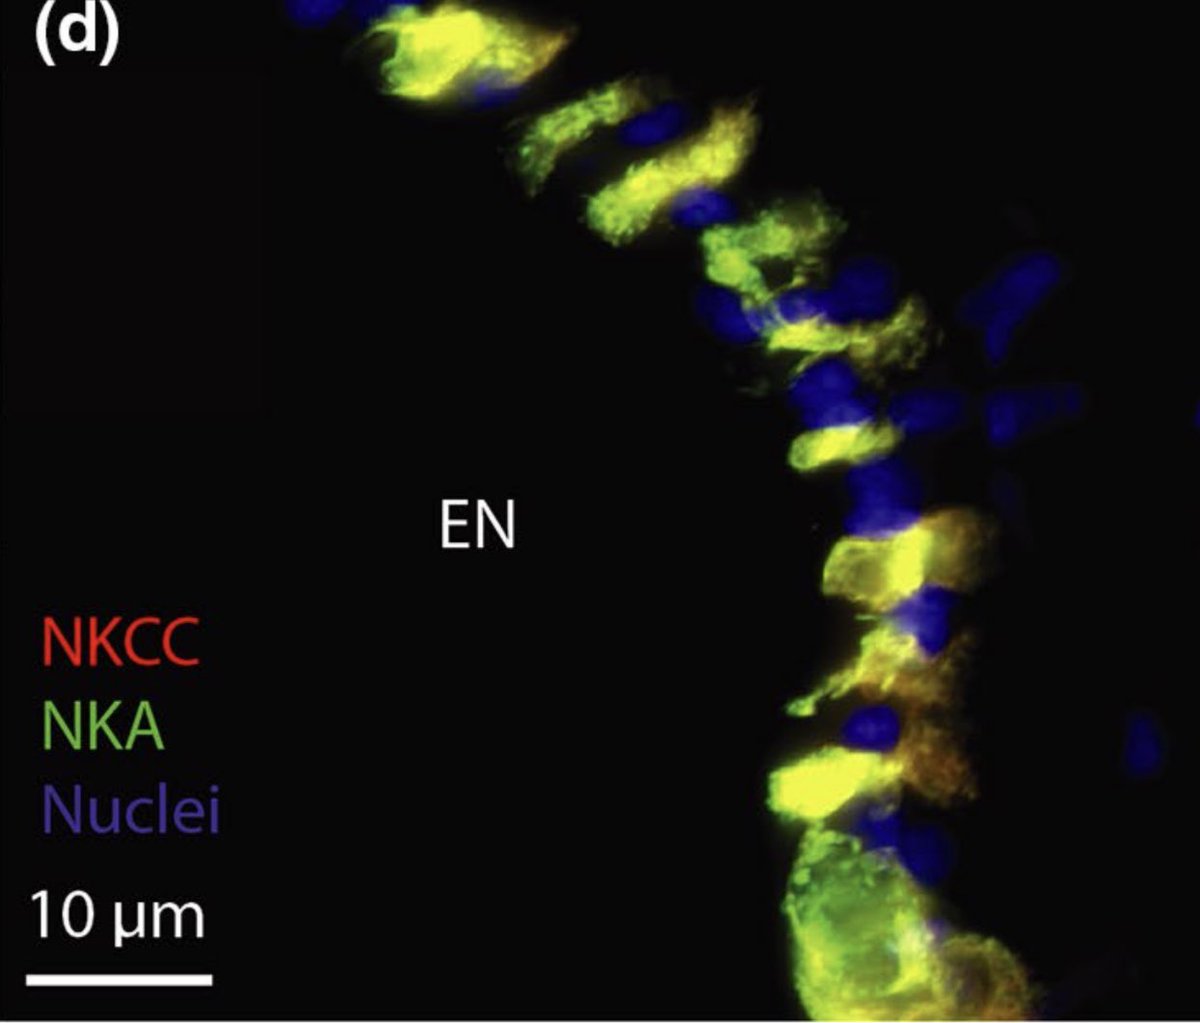 By immunolabeling specific proteins, I can determine whether the proteins overlap within the same cell (yellow) or in different cells (red and green)! Here, you can see how a protein (NKCC) highly overlaps with one (NKA) but not the other (CA).